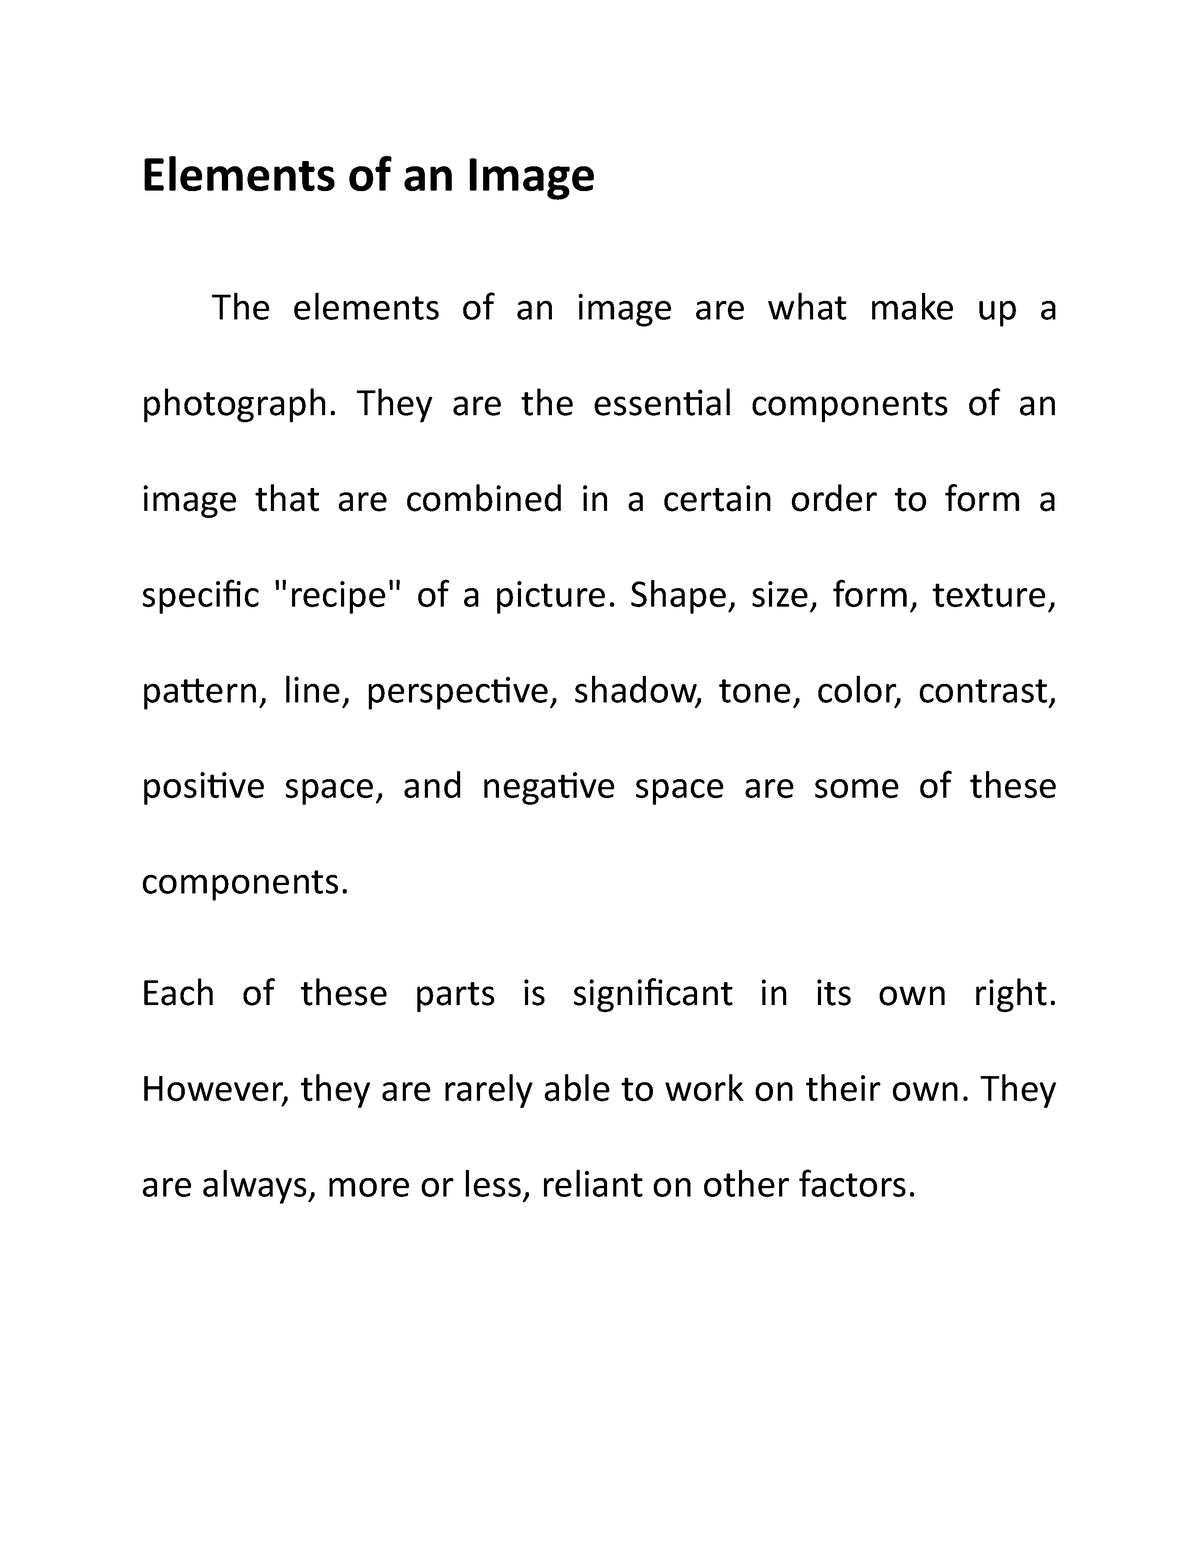 elements-of-image-elements-of-an-image-the-elements-of-an-image-are